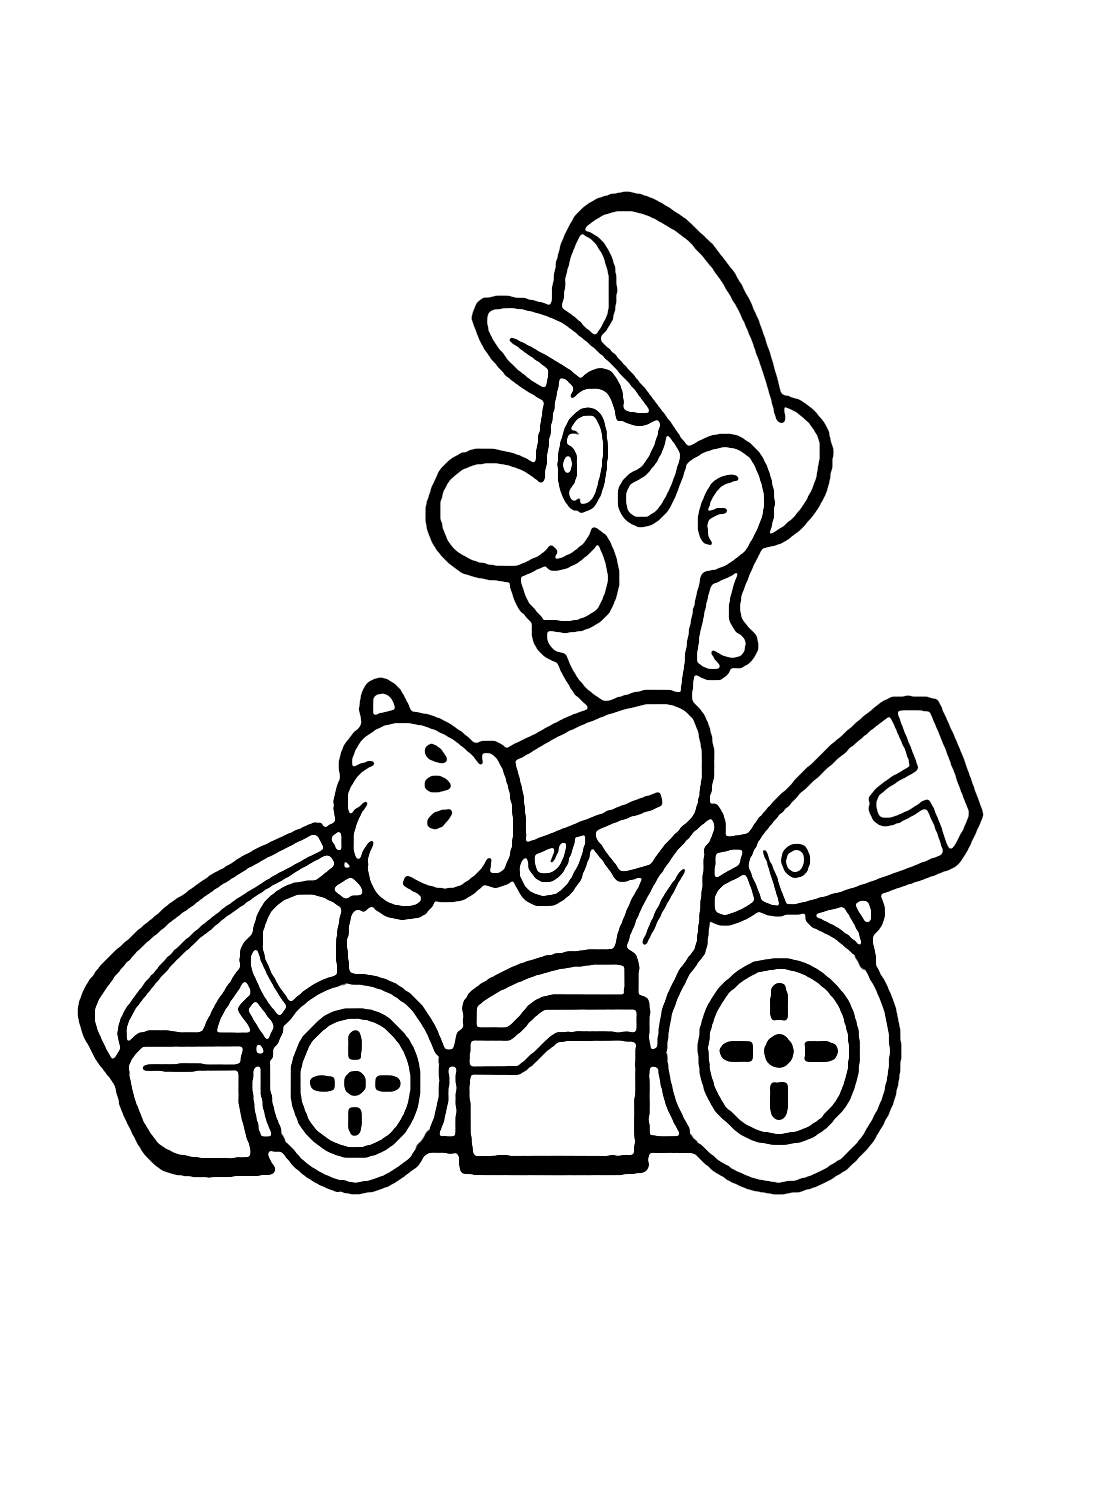 Mario Kart Coloring Pages Free Printable Coloring Pages